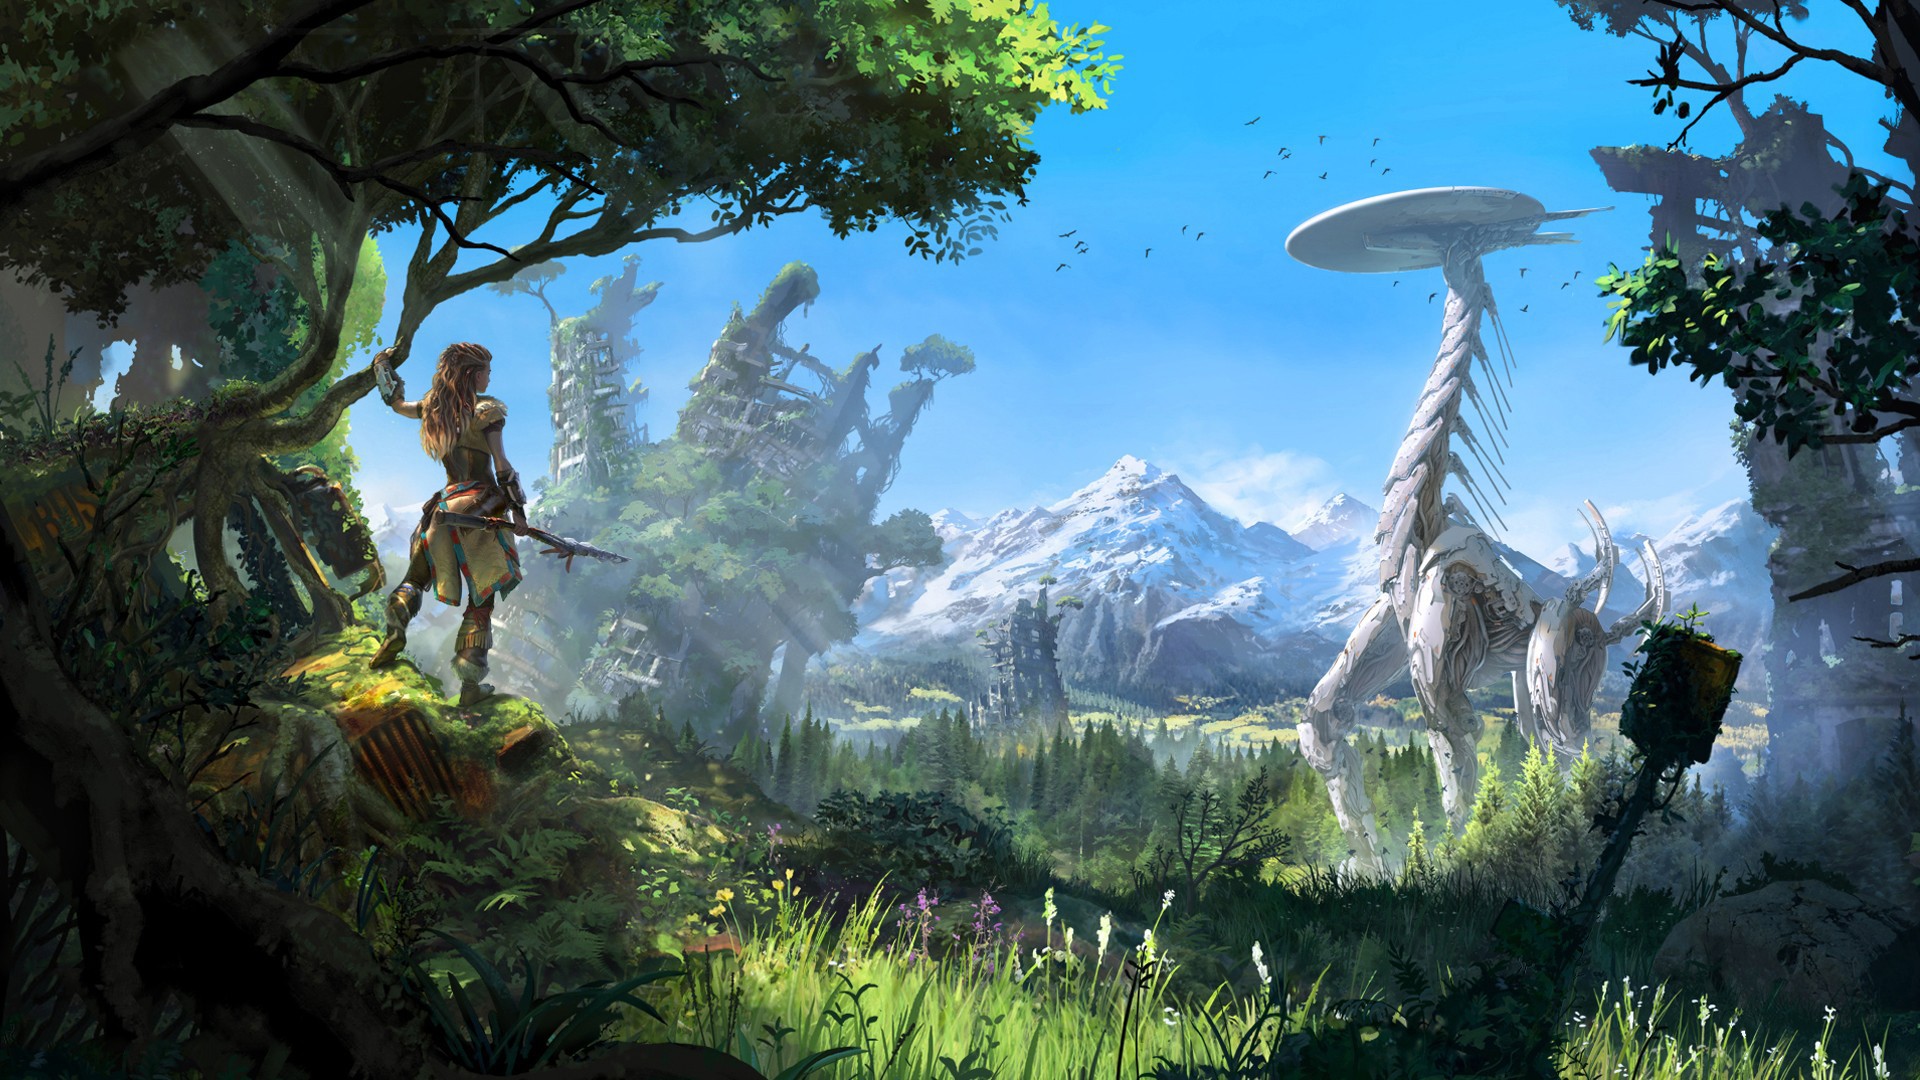 General 1920x1080 Horizon: Zero Dawn PlayStation 4 video games forest landscape robot sky futuristic Aloy video game girls dystopian video game characters video game art Tallneck